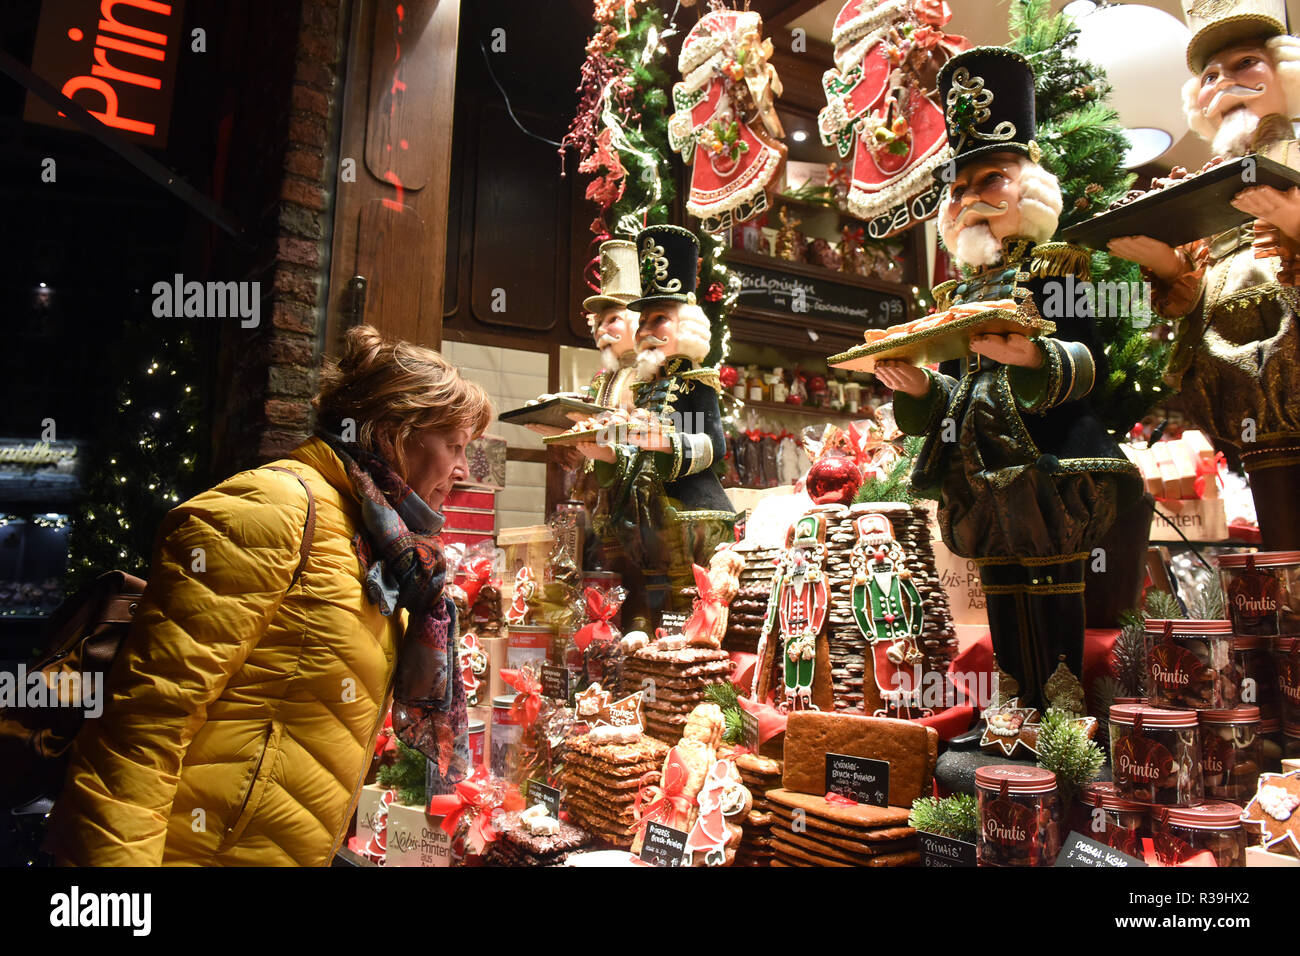 Aachen, Germany. 22nd Nov 2018. Christmas window decorations unveiled for  the German Christmas market which opens tomorrow in Aachen Germany Europe.  This Christmas shopper is looking at the Nobis Printen confectionary shop.